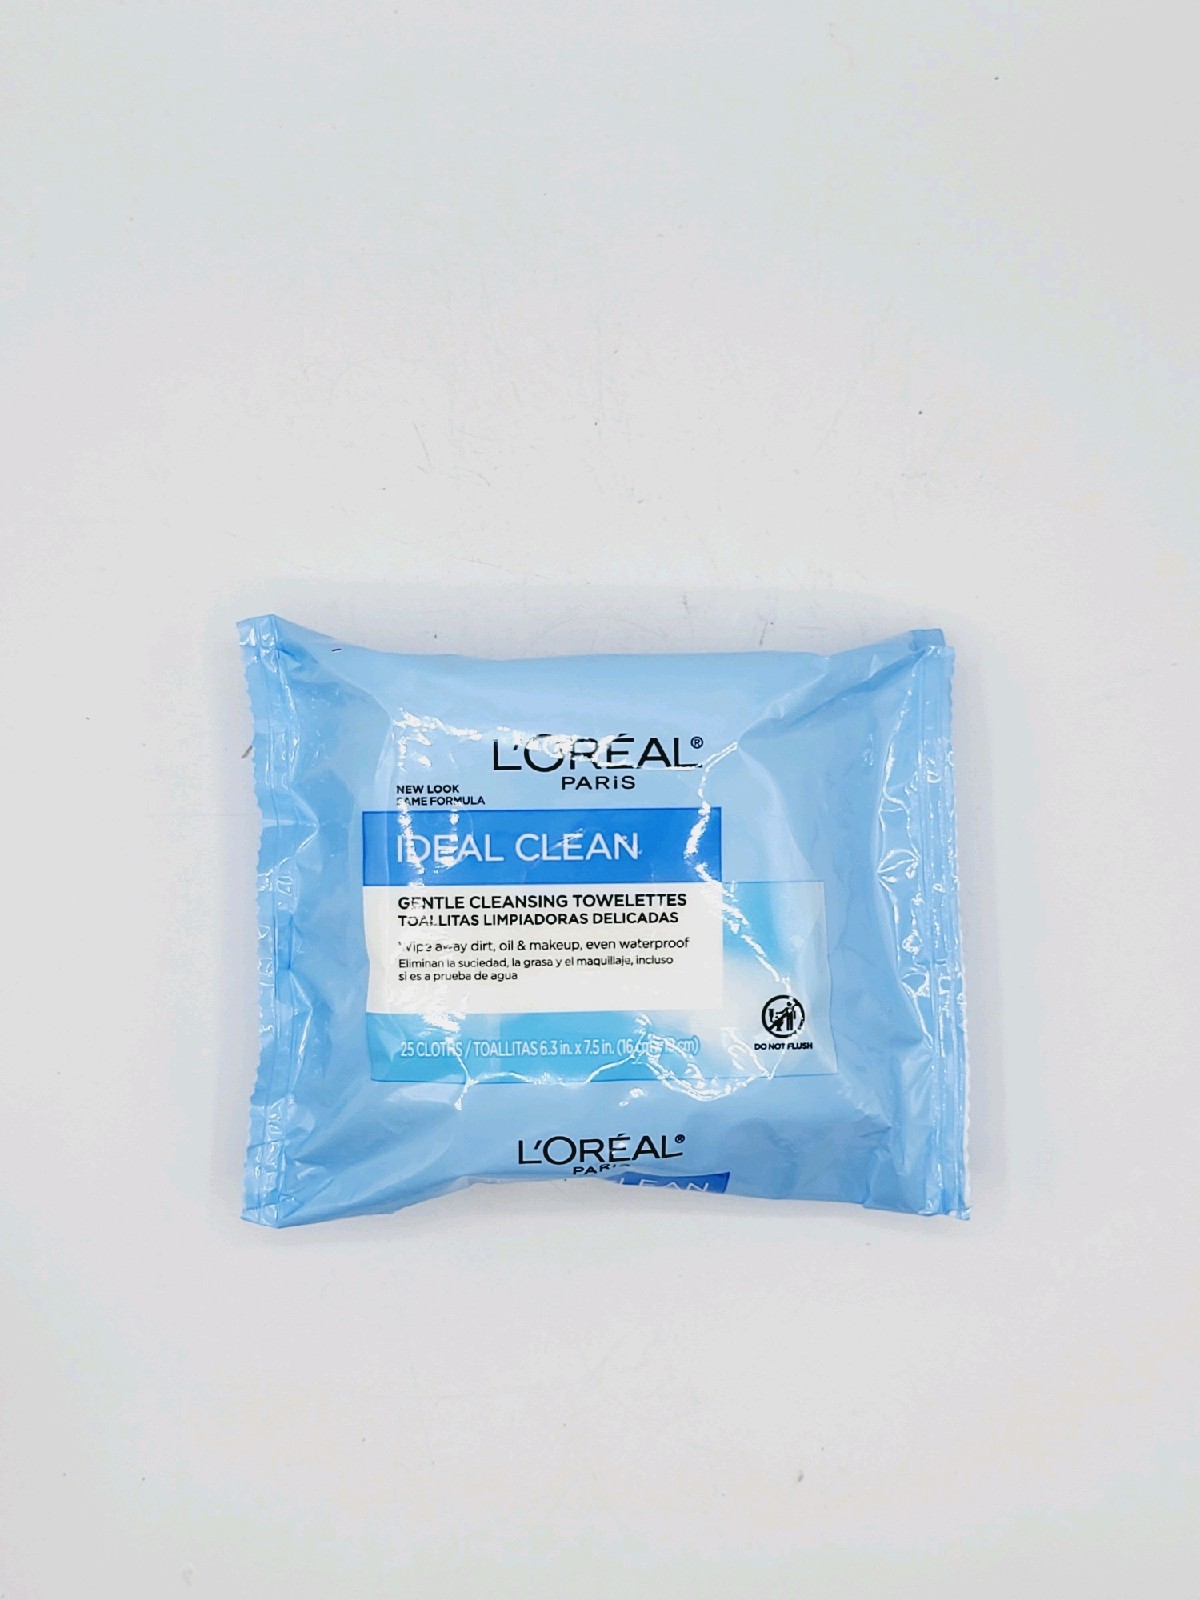 L'Oreal Gentle Cleansing Towelettes 25 Count